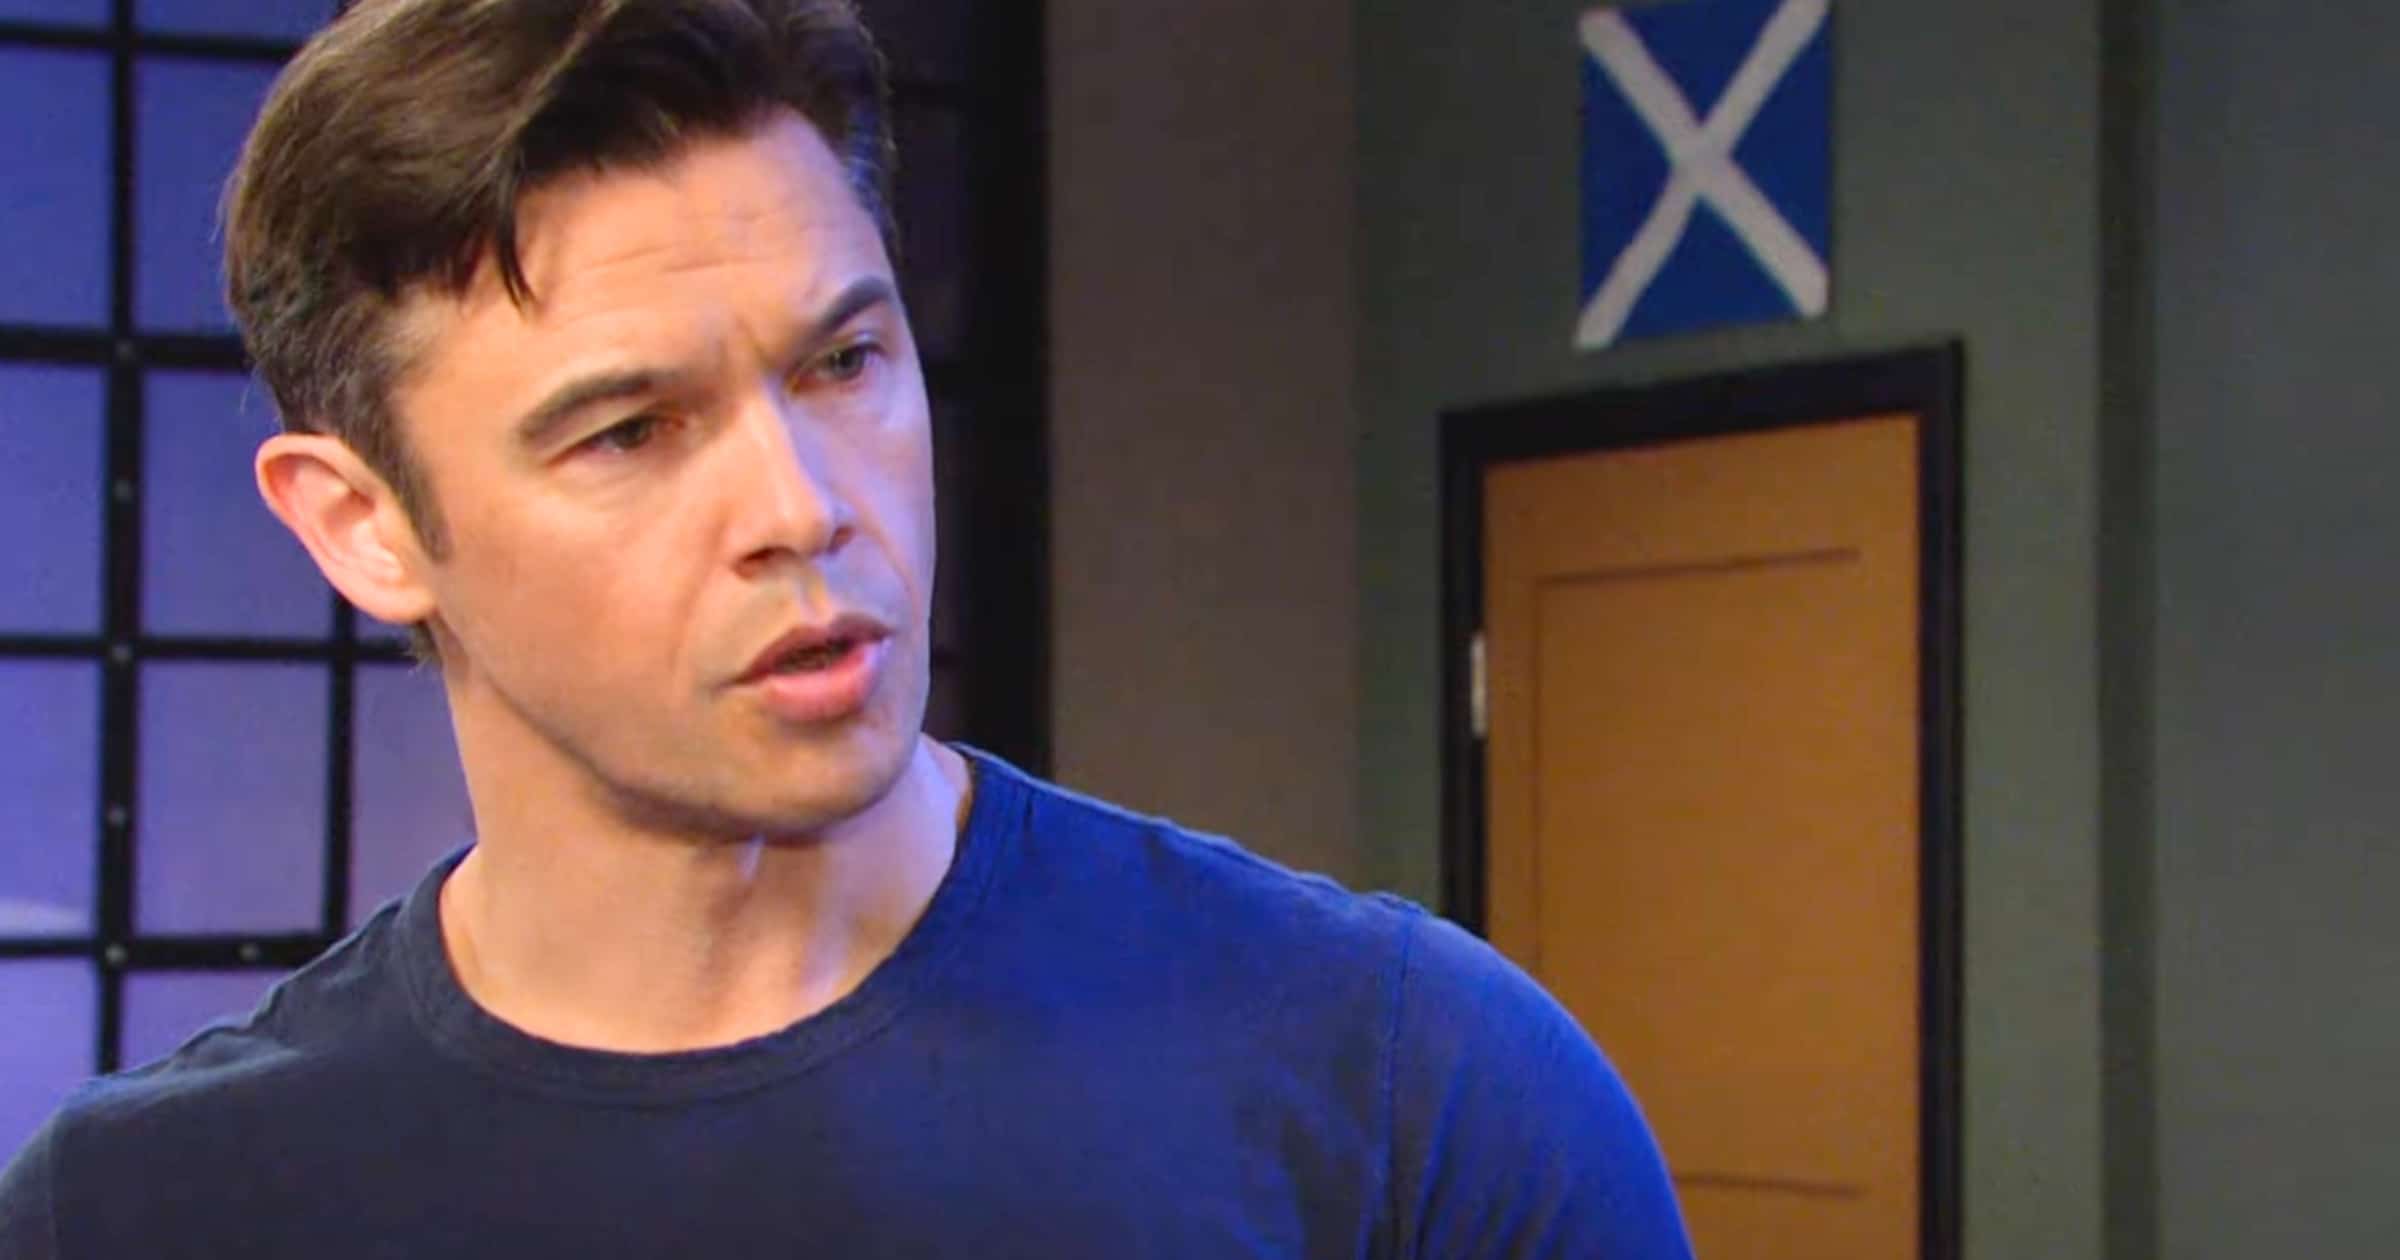 Days of Our Lives - Jan 15-19 - Xander